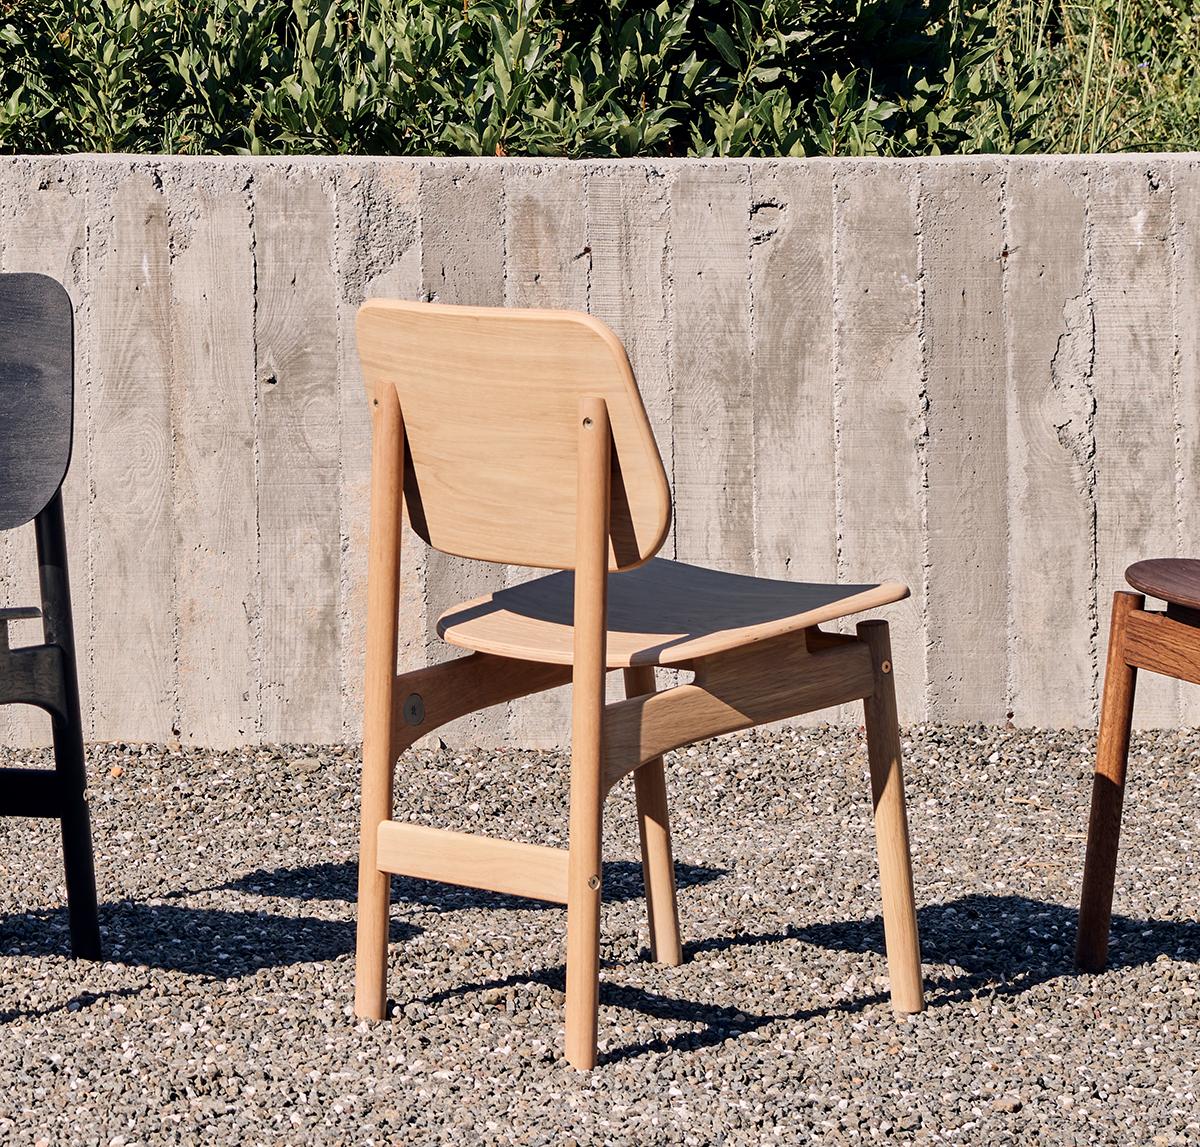 Characterized by rectangular forms, Frame Chair is an expression of comfort and well-balanced geometry. The confident relationship between skeleton, seat and backrest figures its presence gently.

Frame Chair is a seating piece that presents the